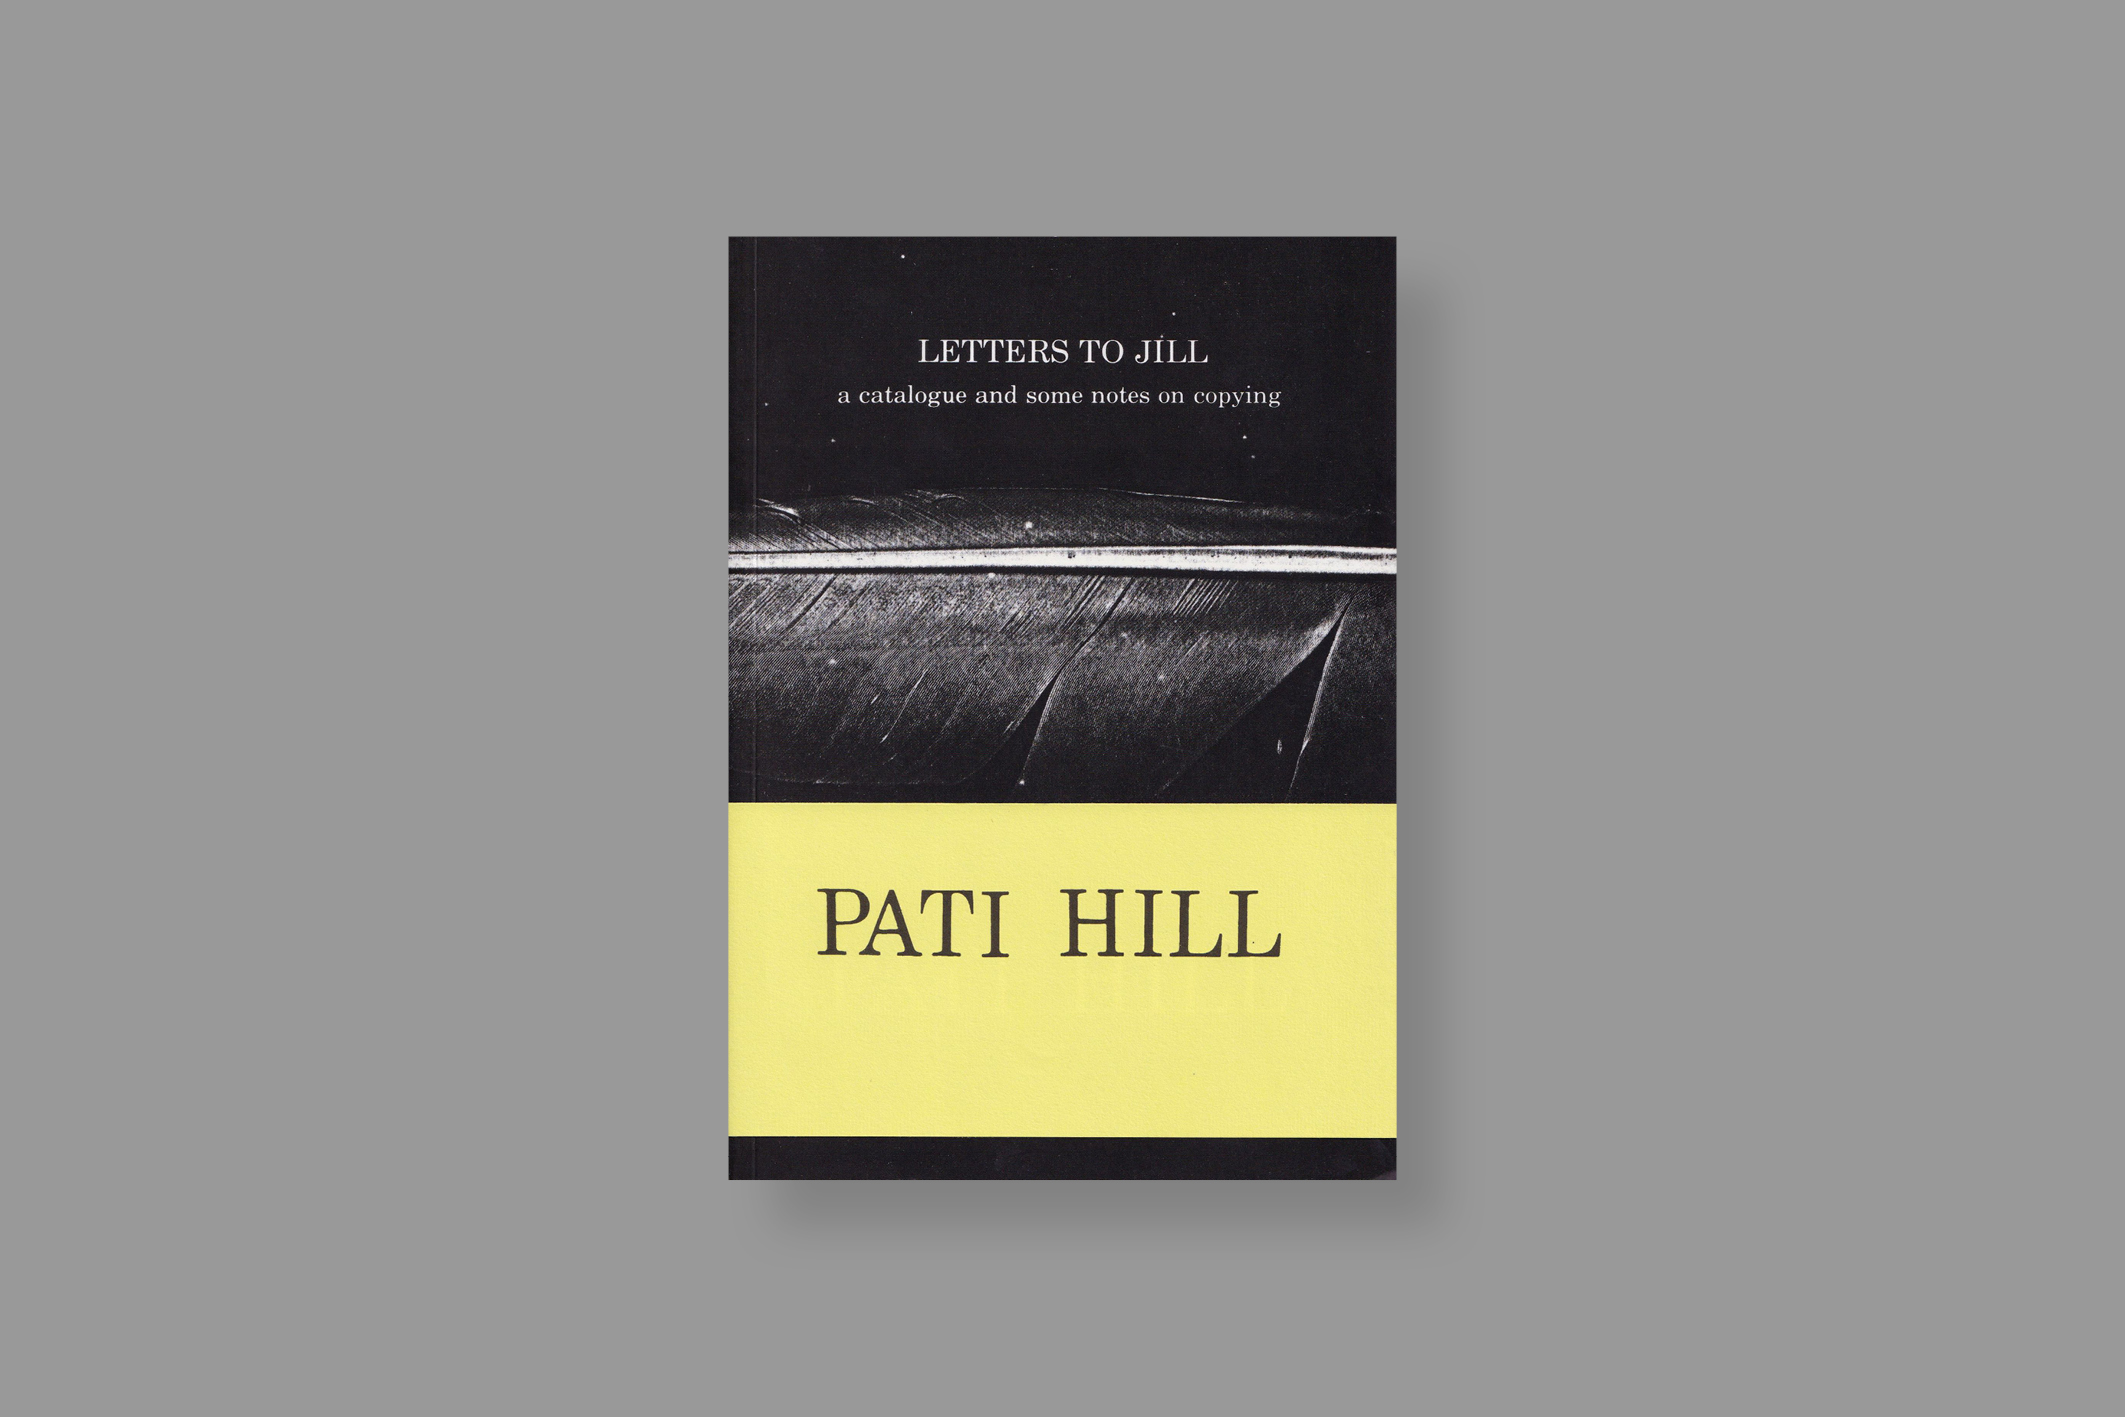 Letters-to-Jill-Pati-Hill-mousse-publishing-cover